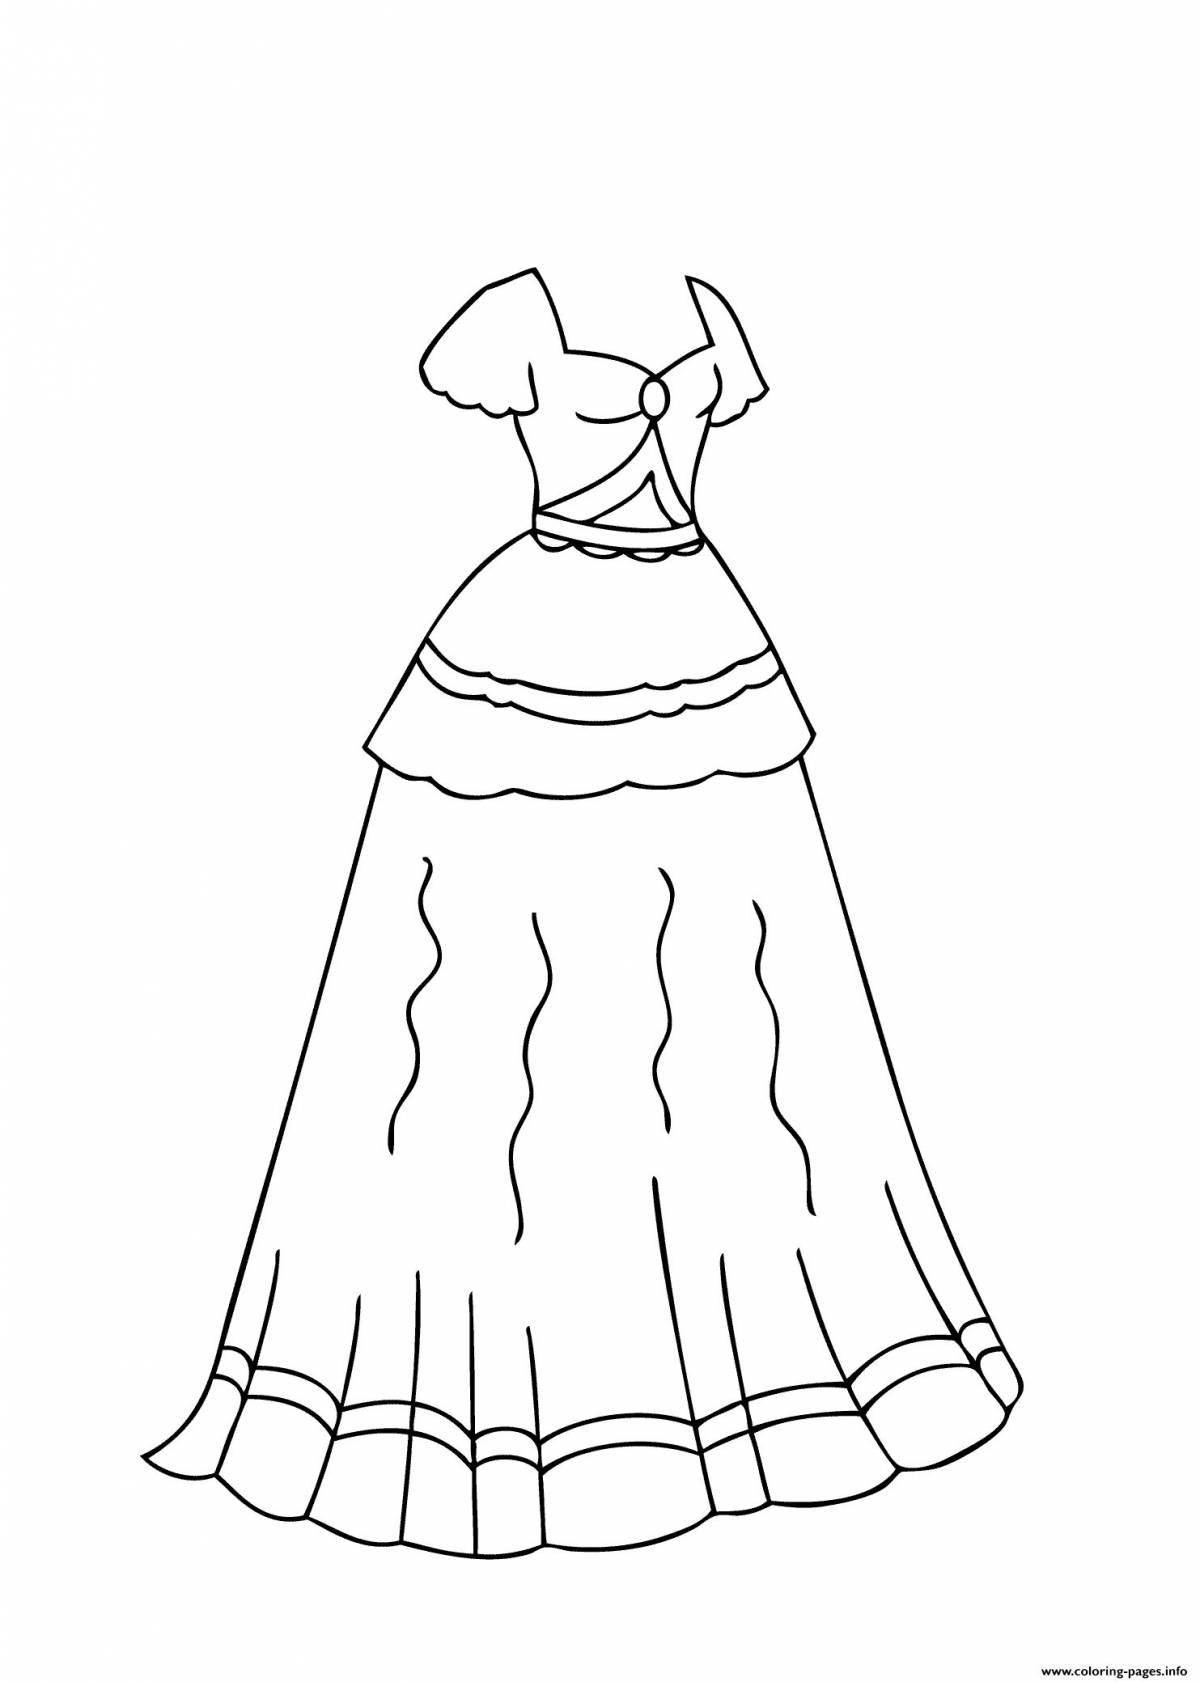 Playful outfit coloring page